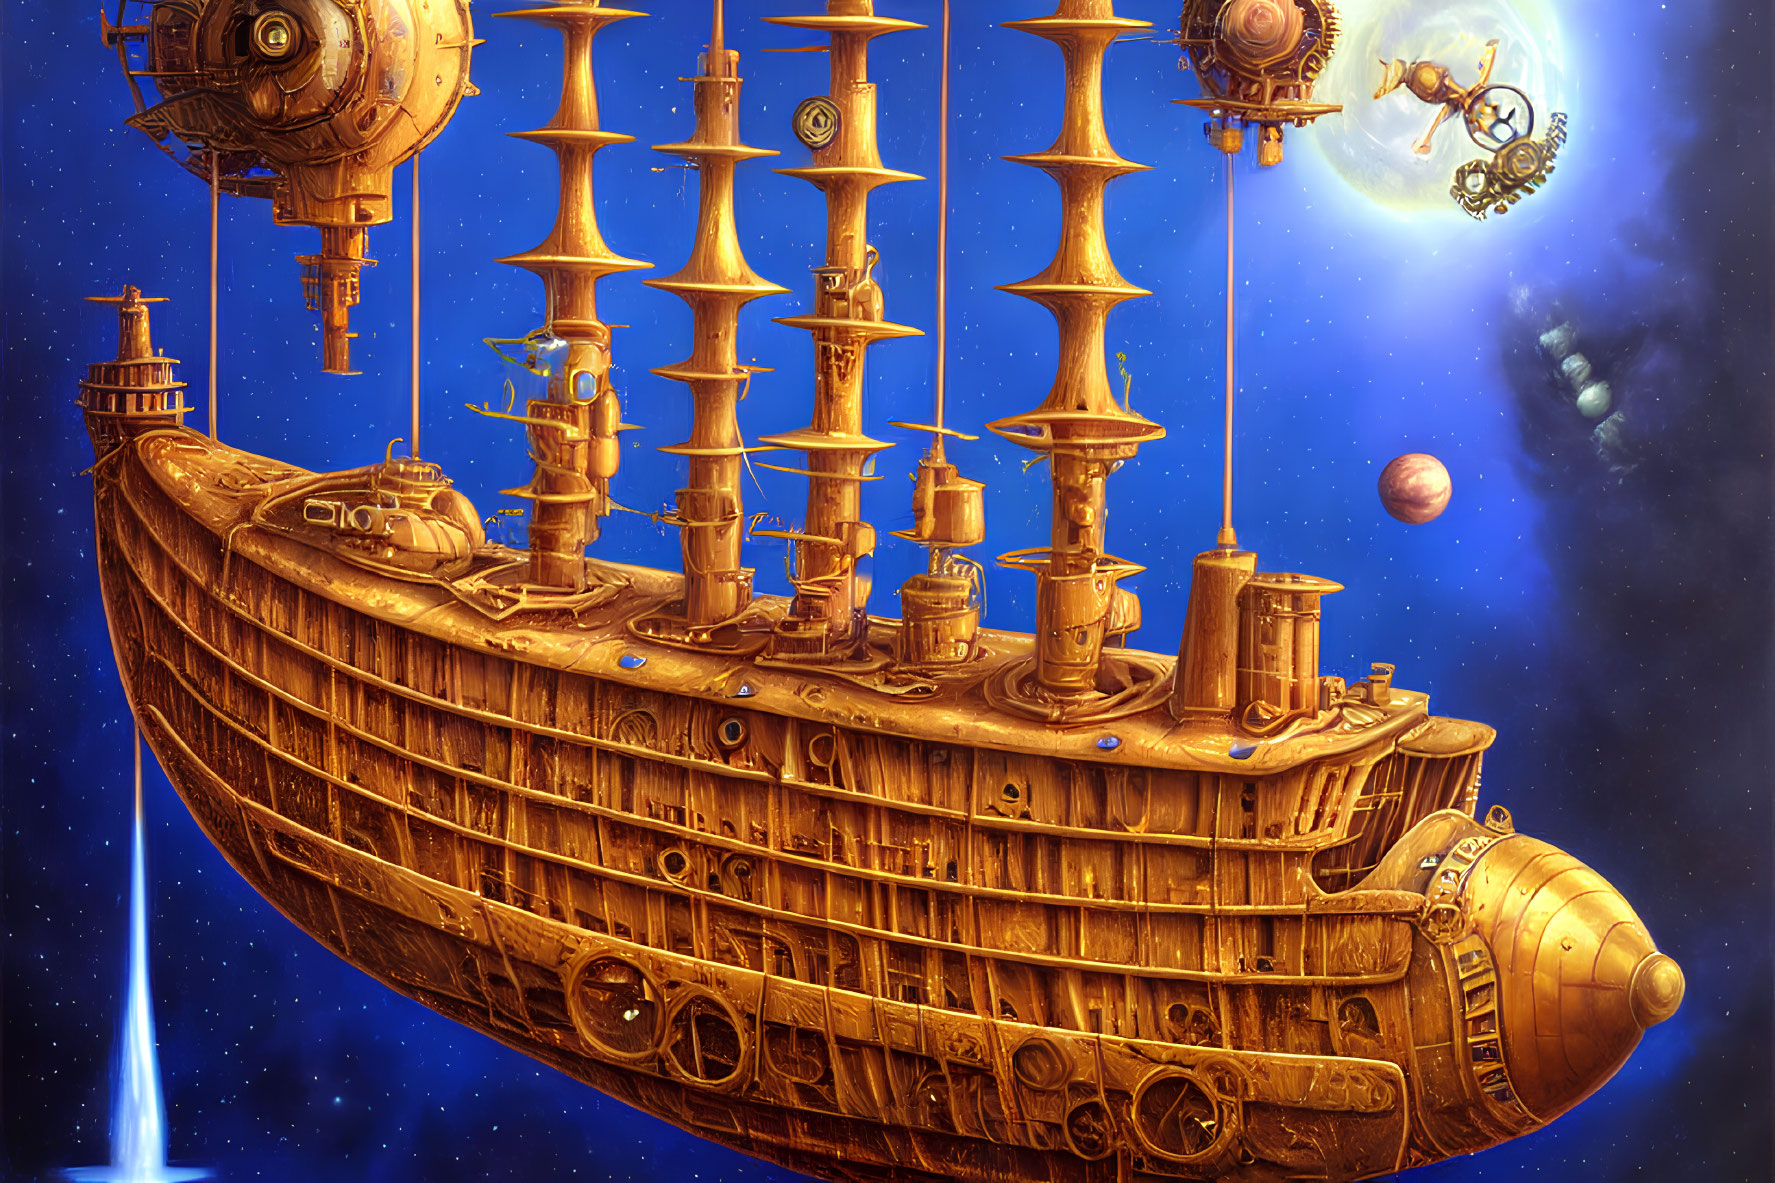 Golden galleon-shaped spaceship among whimsical spacecraft in space